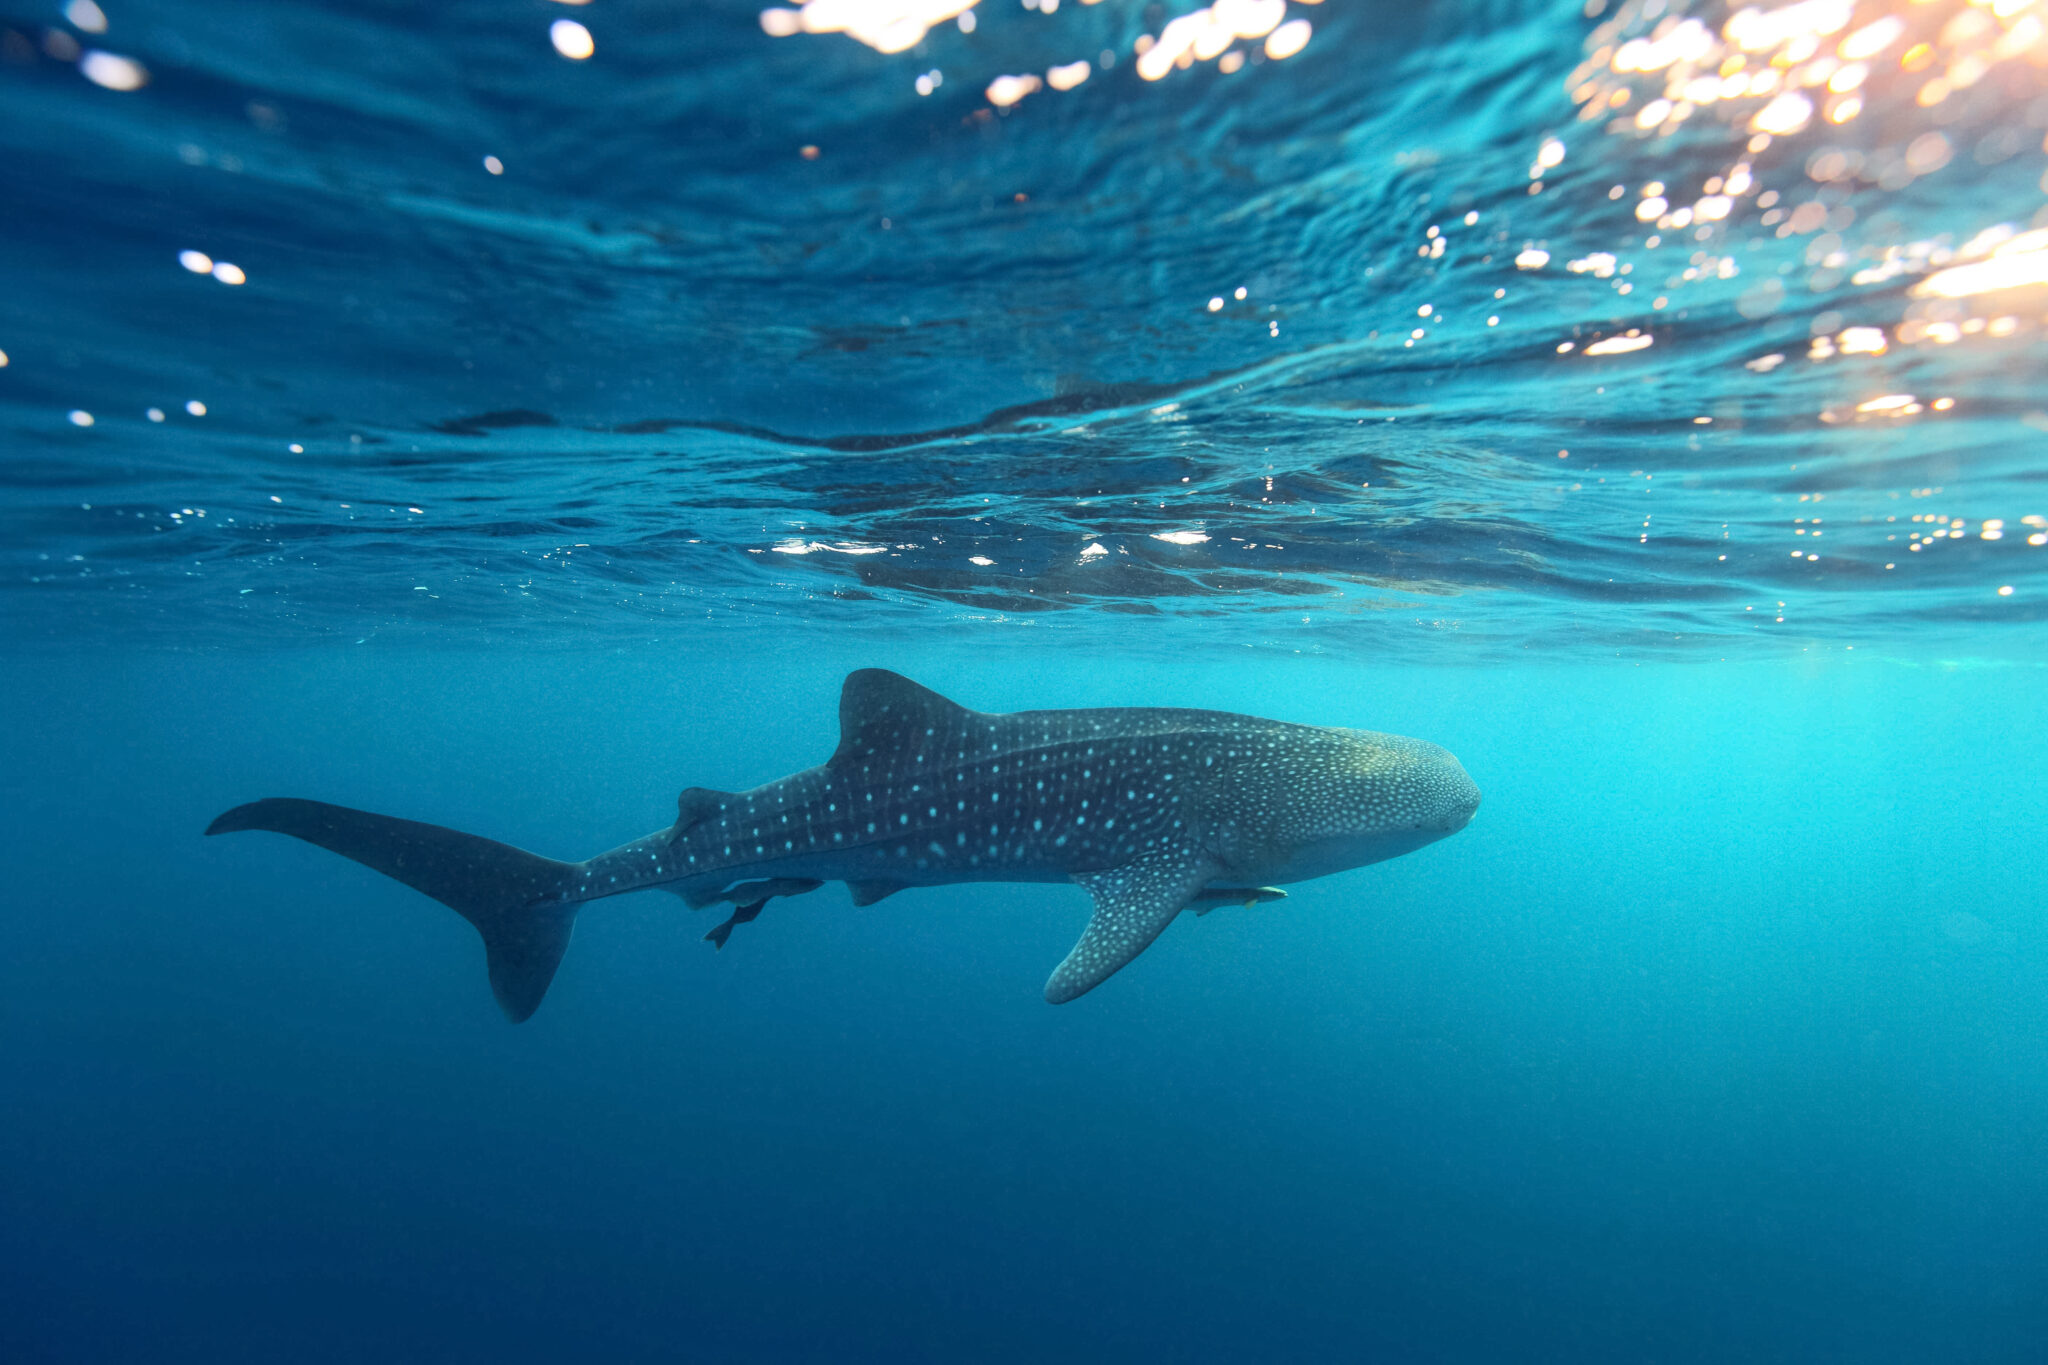 A whale shark swimming below the surface of the ocean, and a popular encounter for liveaboard scuba divers visiting Thailand